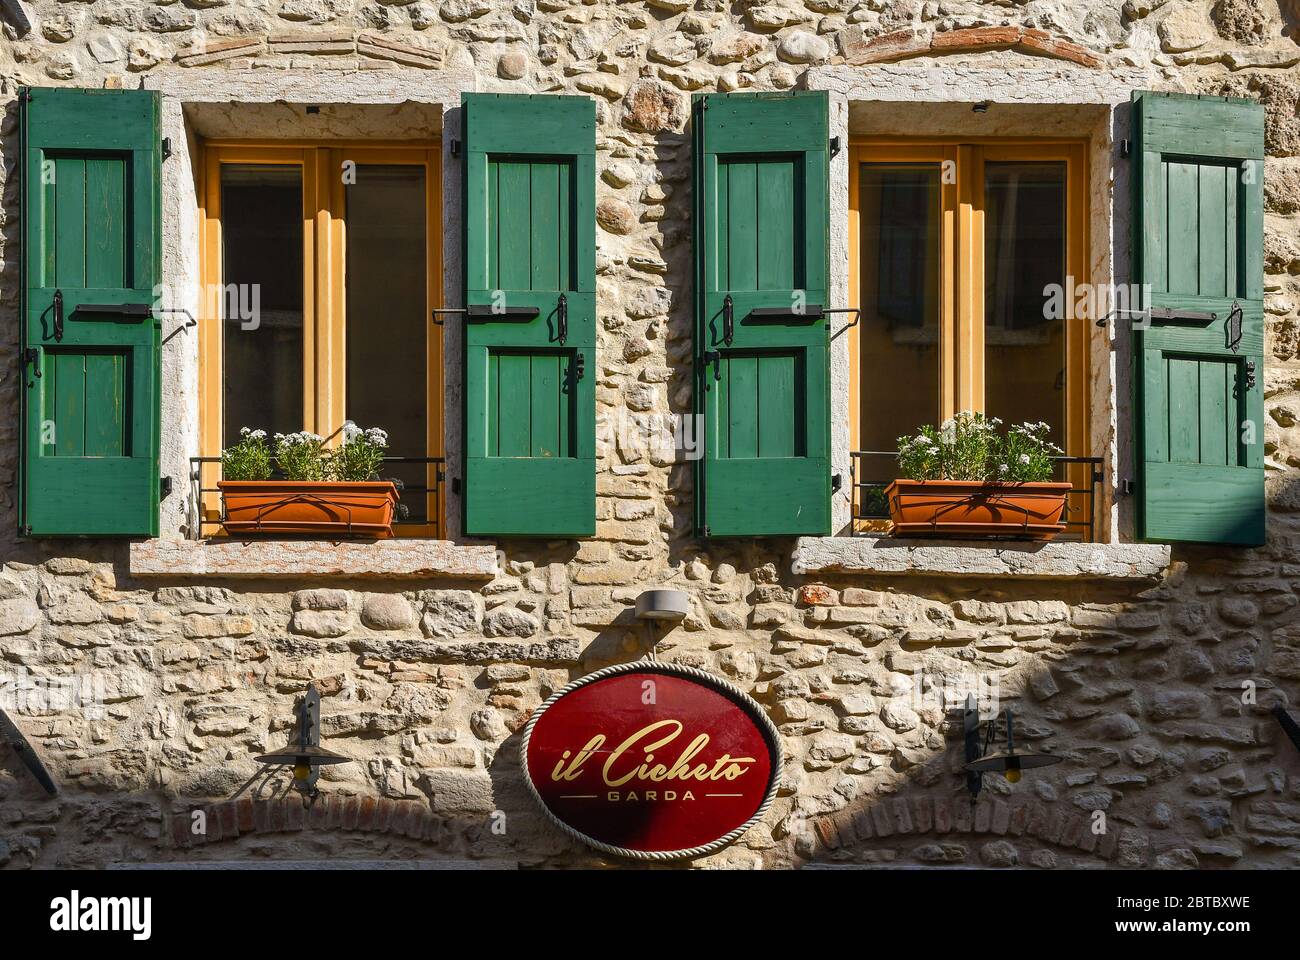 Close-up of the stone façade of the tavern 'Il Cicheto', name of the tasty appetizer of Venetian cuisine, with a pair of windows, Garda, Veneto, Italy Stock Photo